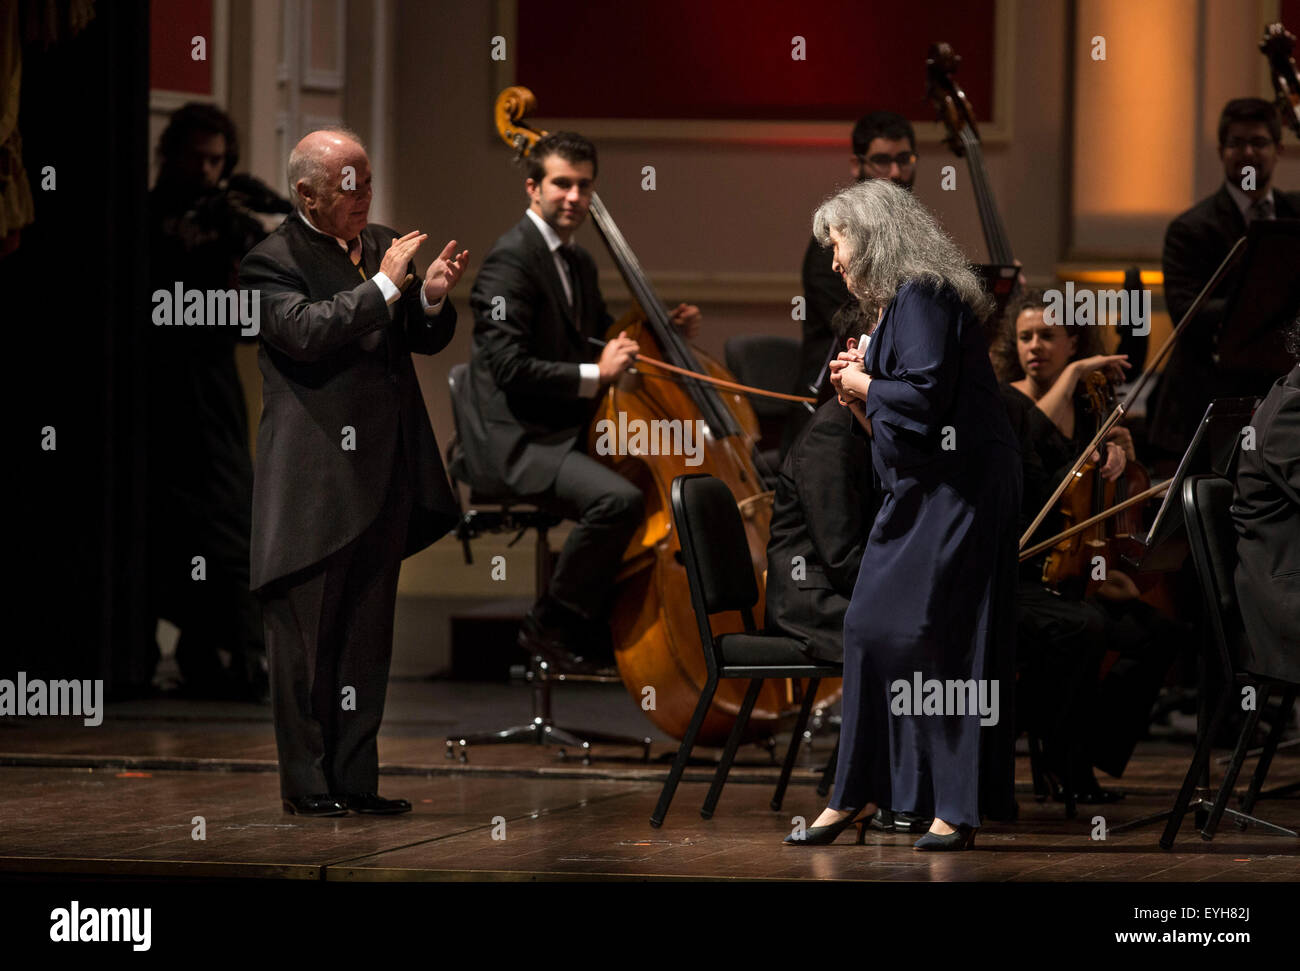 Buenos Aires, Argentina. 29th July, 2015. Argentinean pianist Martha Argerich (R) responds to the applause from Daniel Barenboim (L), Argentinean Musician and orchestra conductor, during a concert held with the West-Eastern Divan Orchestra at the Colon Theater, in Buenos Aires, capital of Argentina, July 29, 2015. © Martin Zabala/Xinhua/Alamy Live News Stock Photo